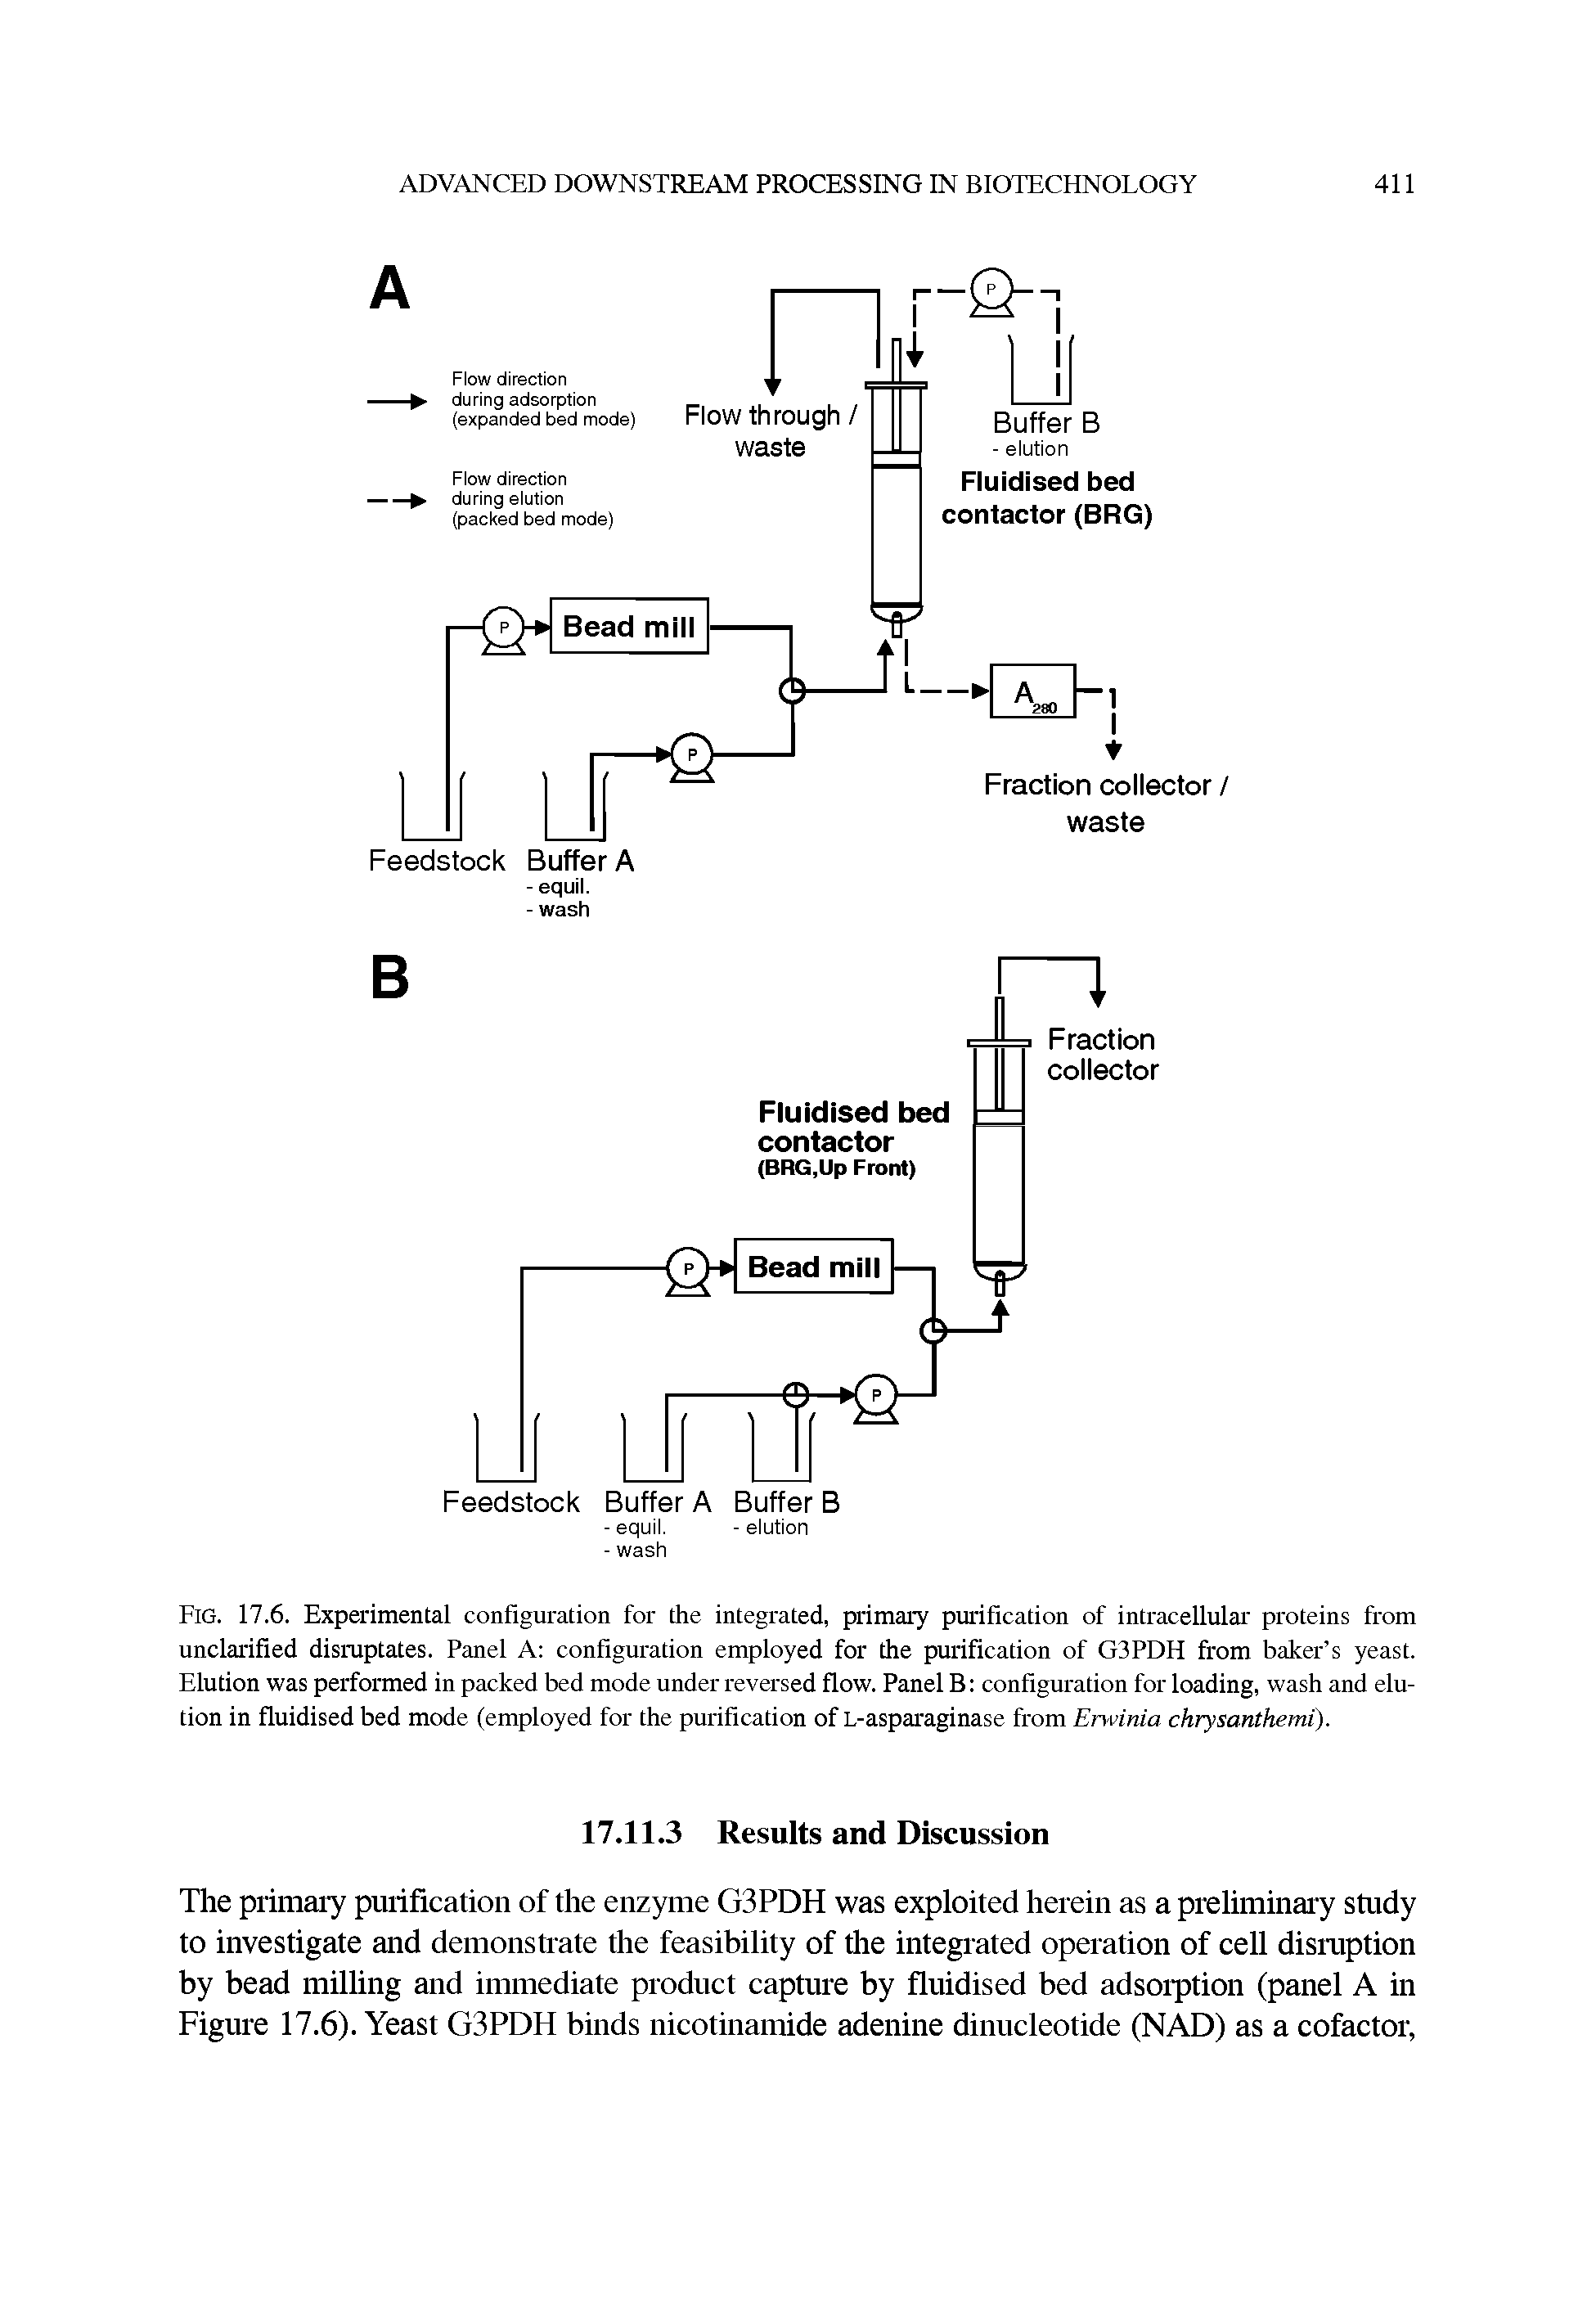 Fig. 17.6. Experimental configuration for the integrated, primary purification of intracellular proteins from unclarified disruptates. Panel A configuration employed for the purification of G3PDH from baker s yeast. Elution was performed in packed bed mode under reversed flow. Panel B configuration for loading, wash and elution in fluidised bed mode (employed for the purification of L-asparaginase from Erwinia chrysanthemi).